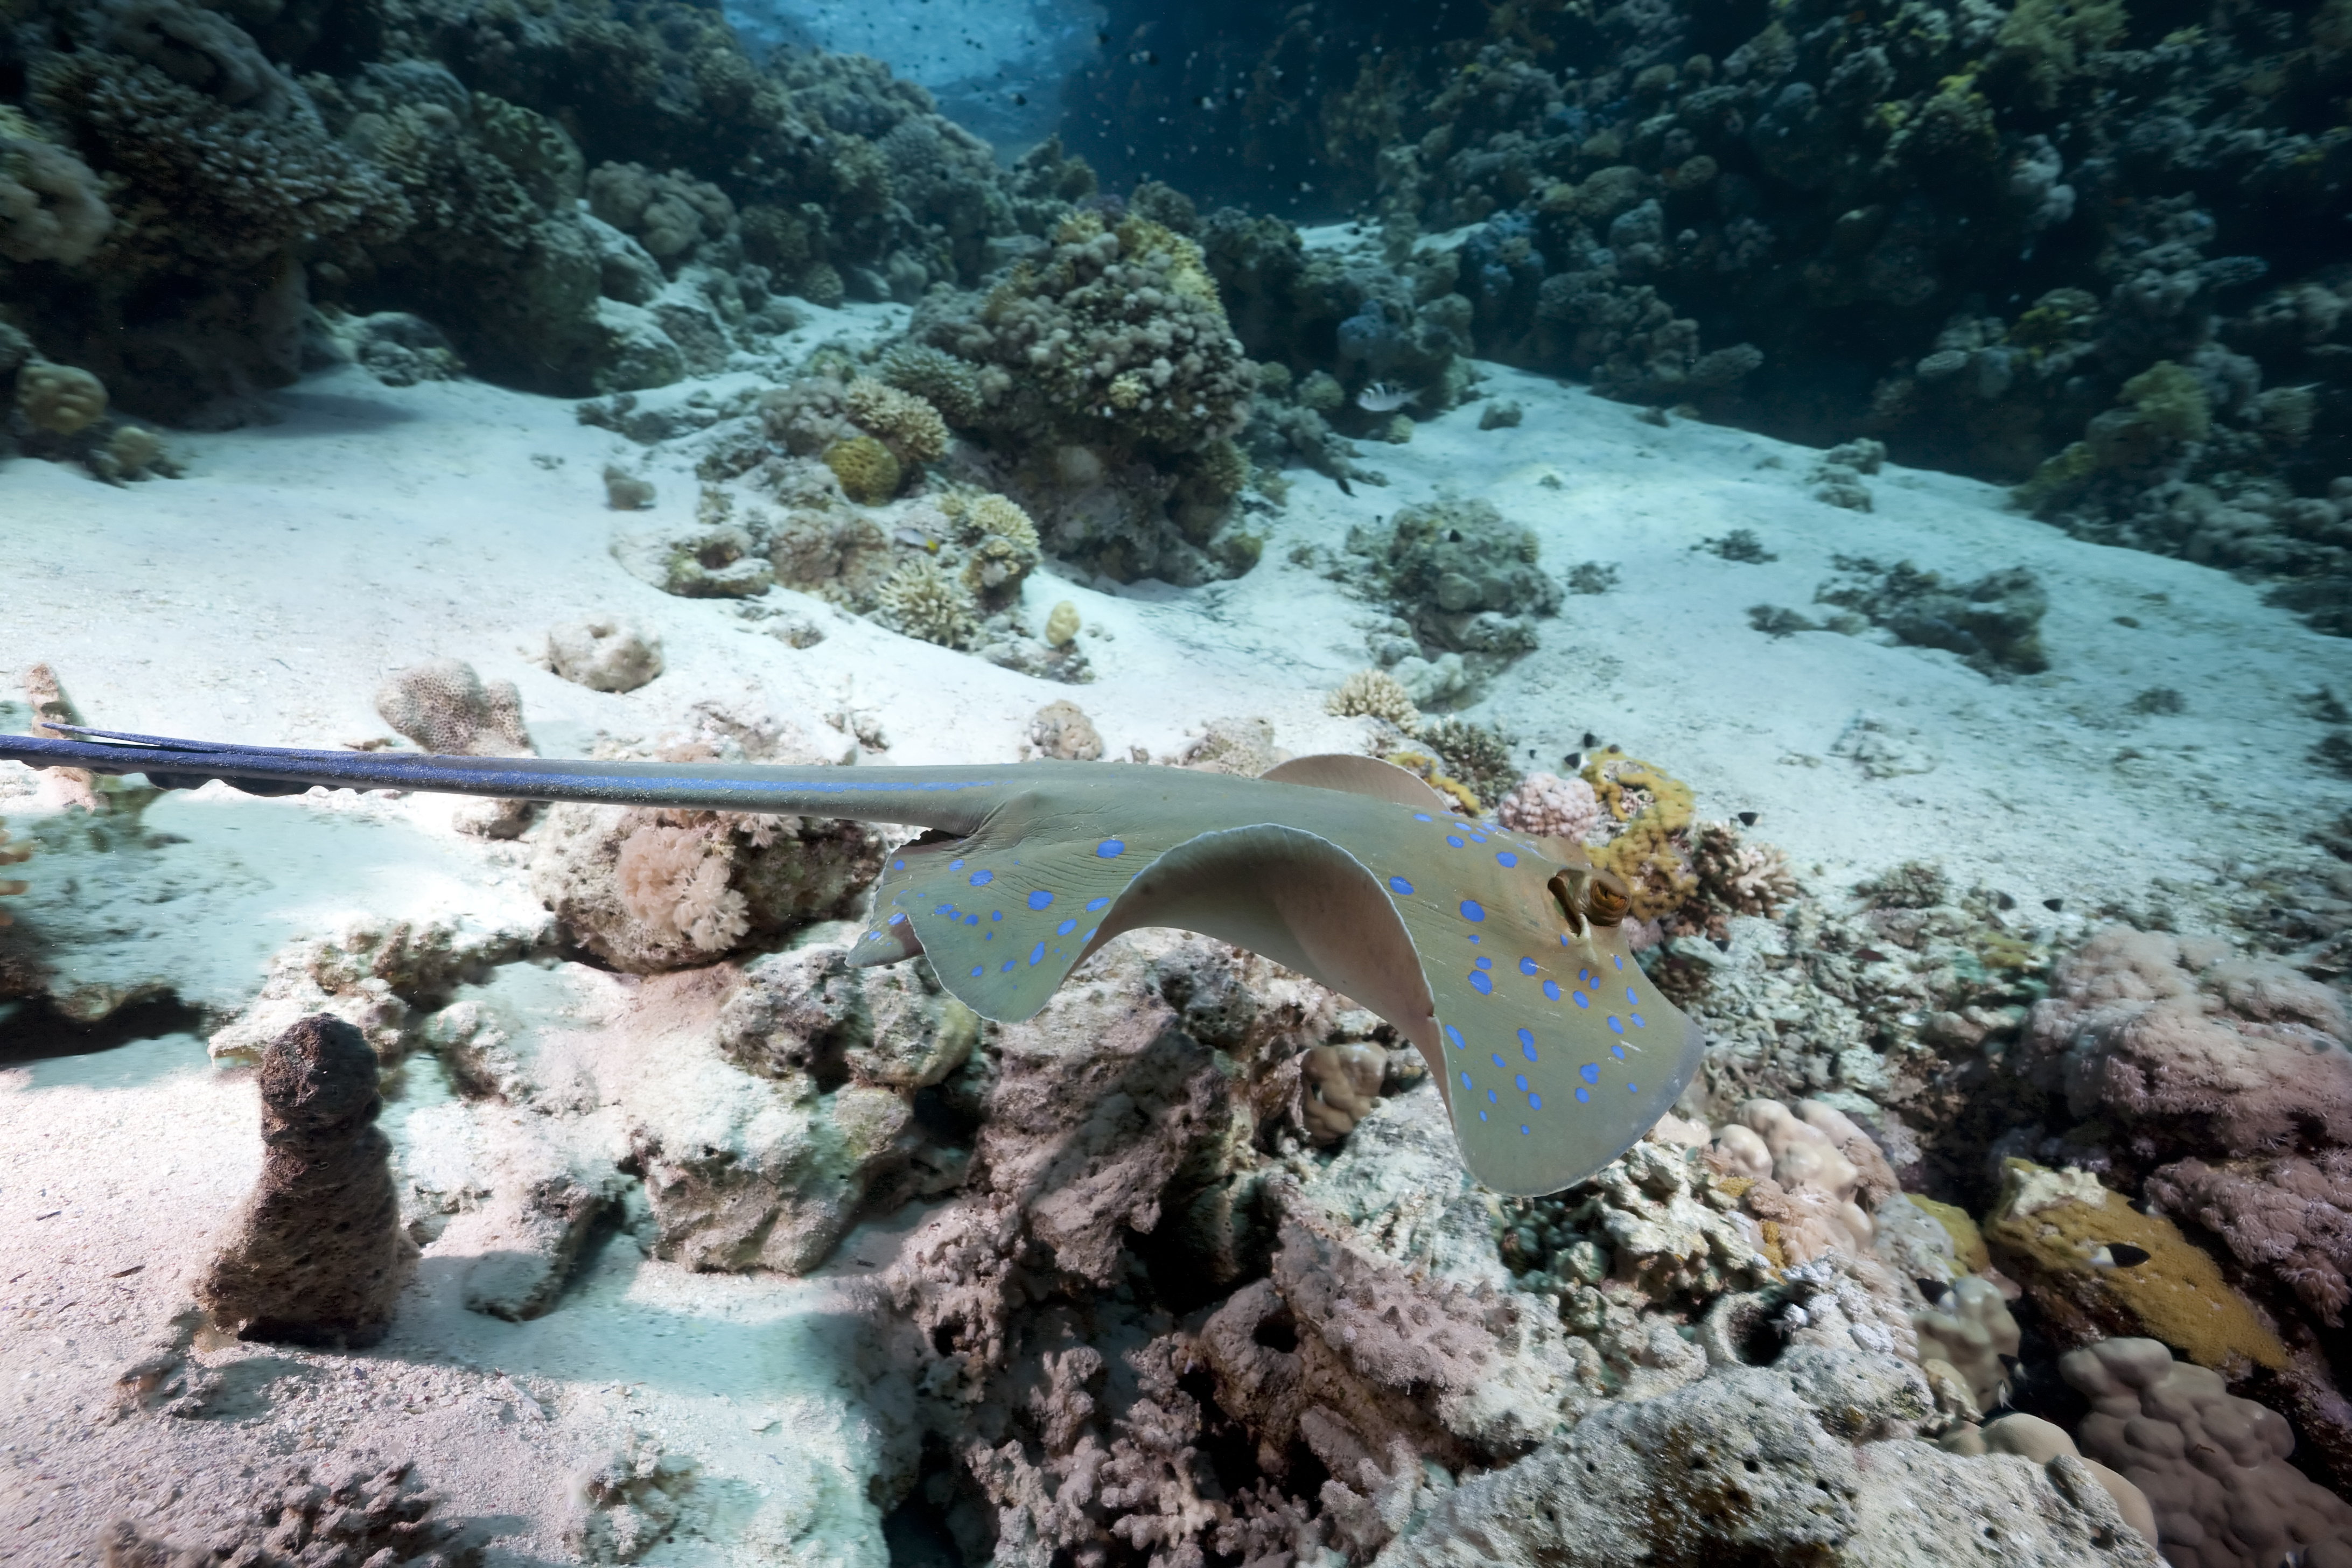 Blue spotted stingray hovers above coral structures at Turtle Island in Vietnam